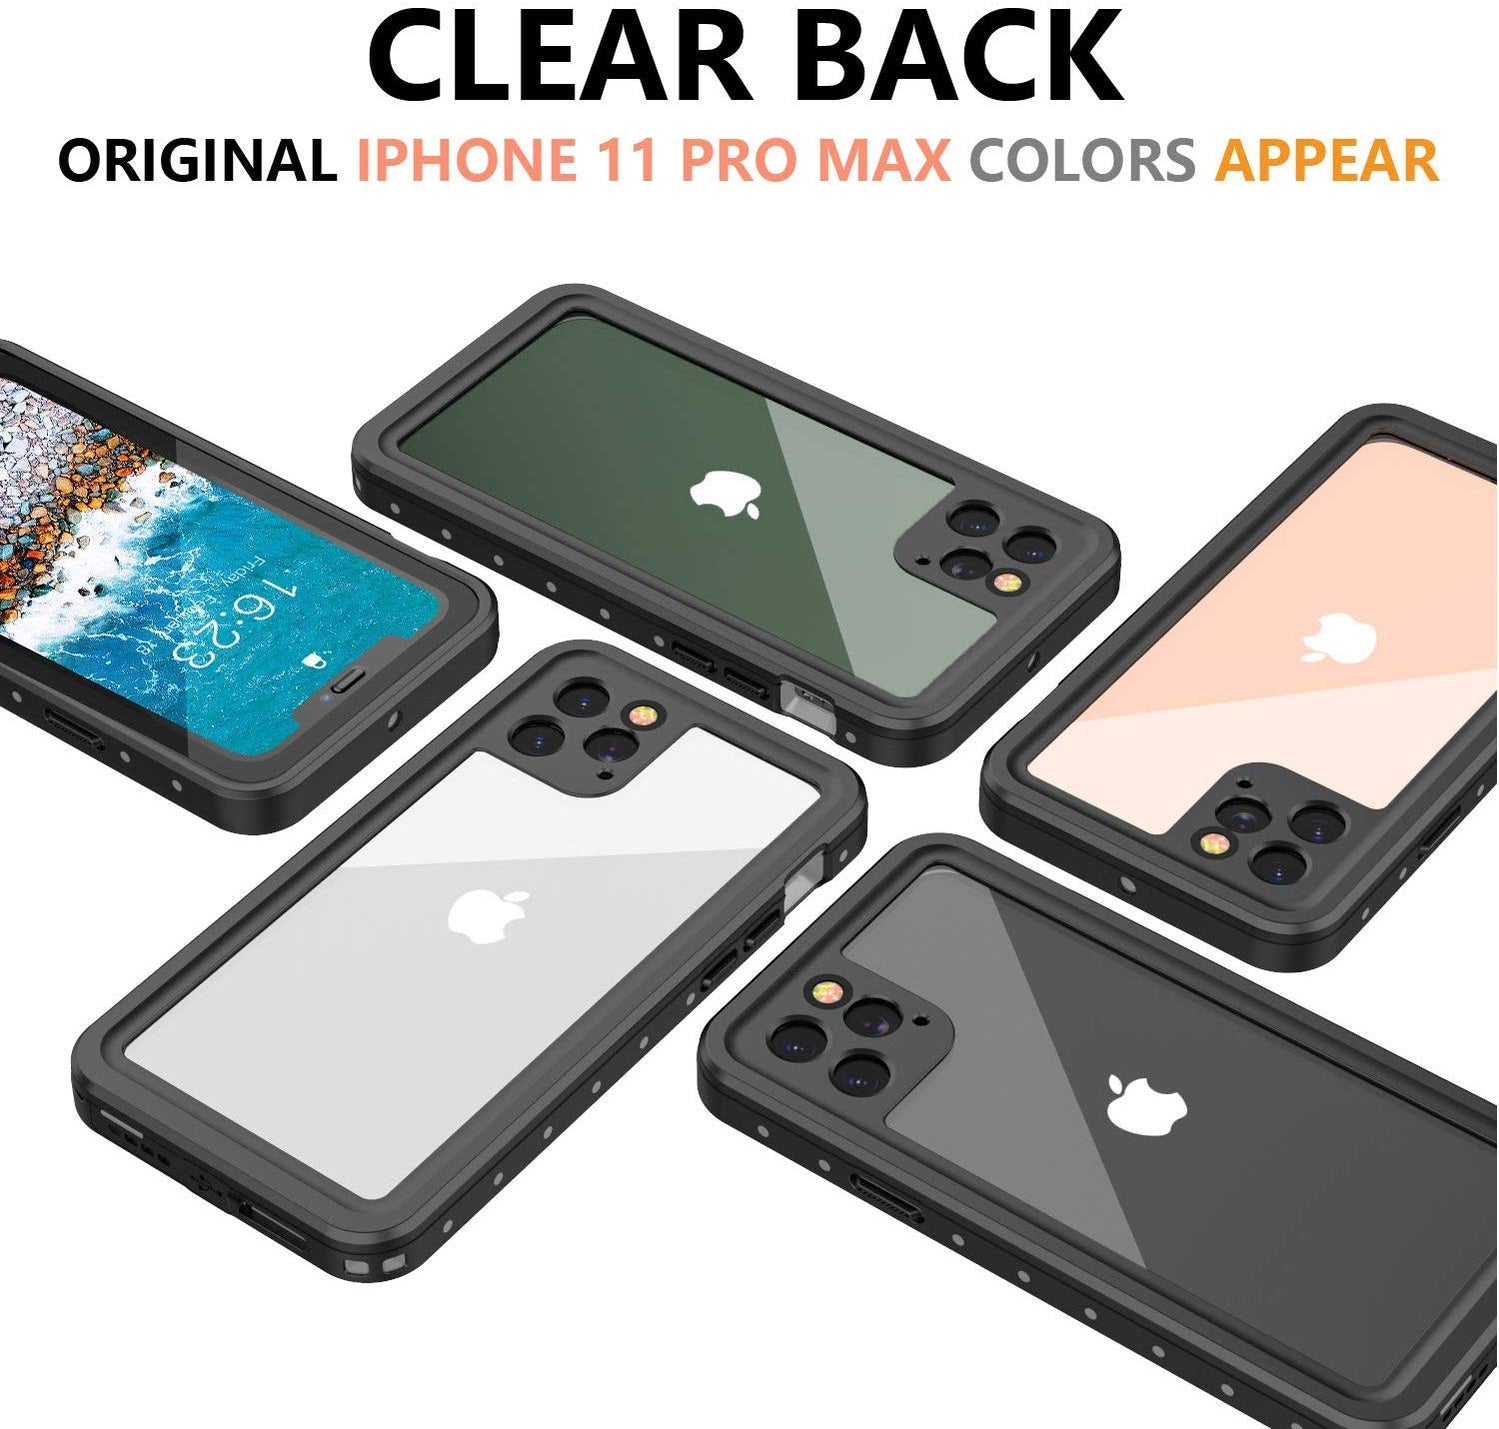 Waterproof Shockproof Dustproof Snowproof Case for iPhone 11 Pro Max *Free Shipping*